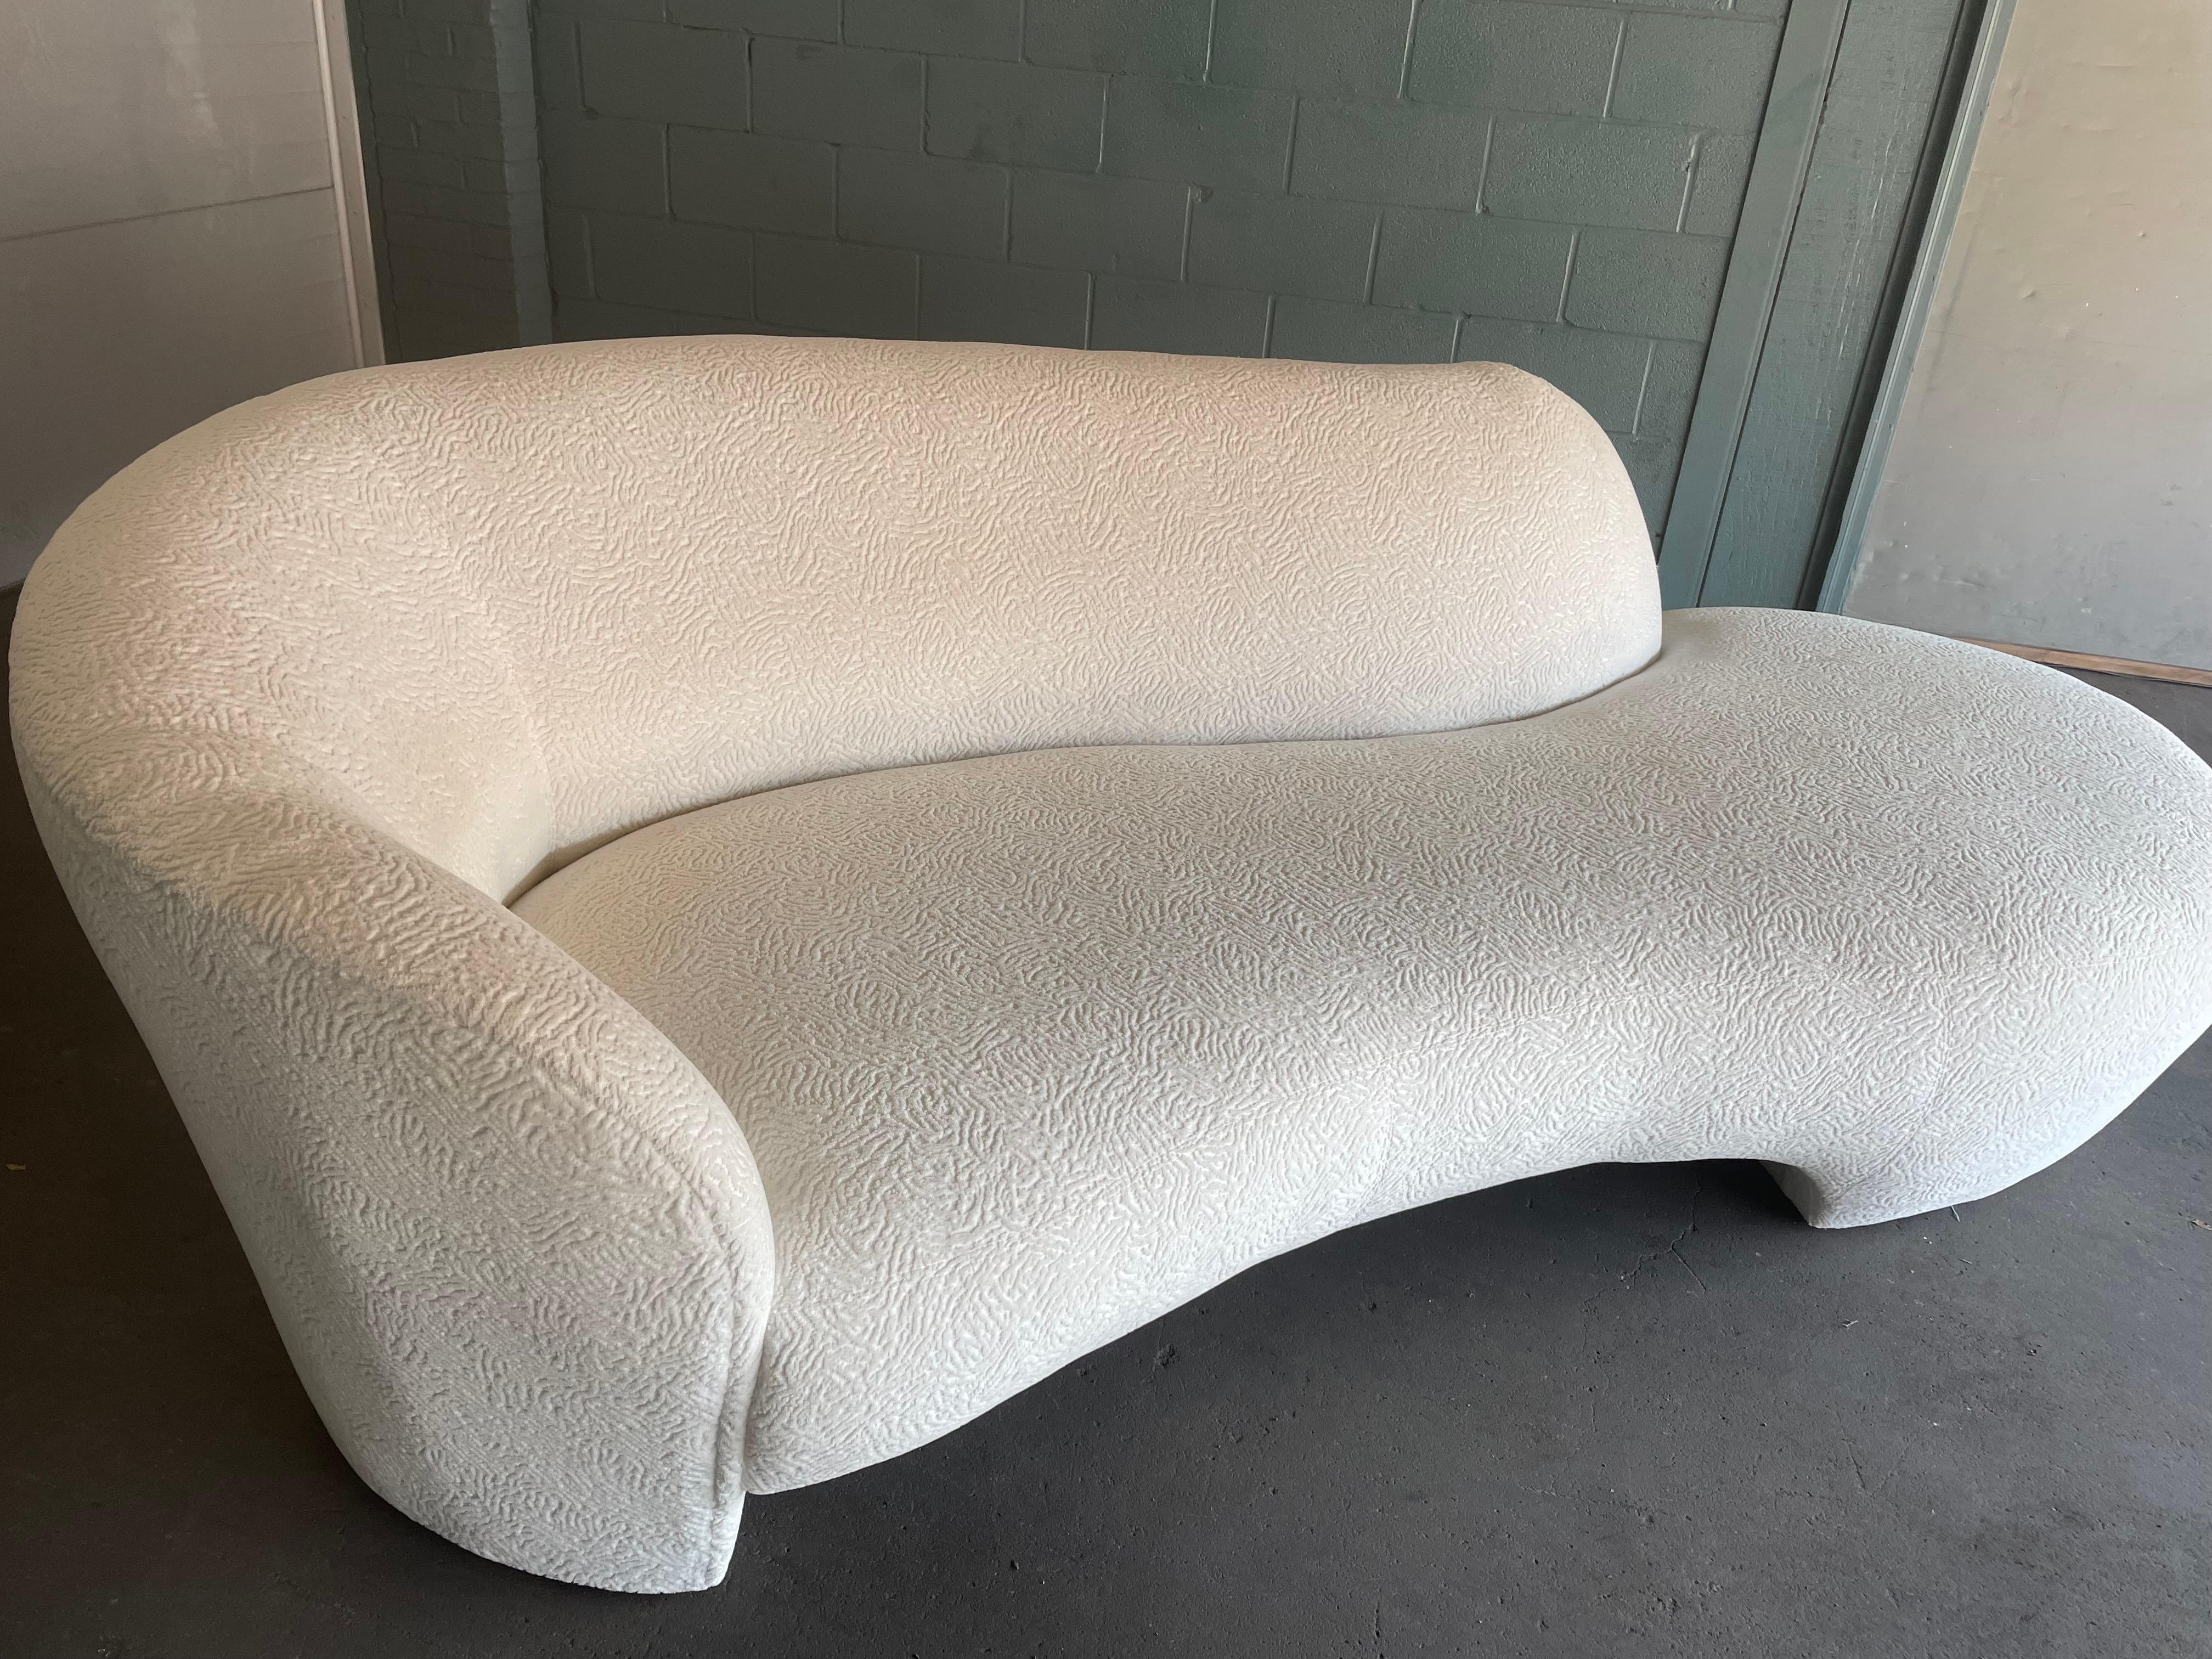 Sexy and classic chaise lounge in beautiful condition. The pure white fabric is soft and feels beautiful to the touch. Sofa has been Professionally Deep Cleaned and proof is available upon request.
And although professionally cleaned, there is